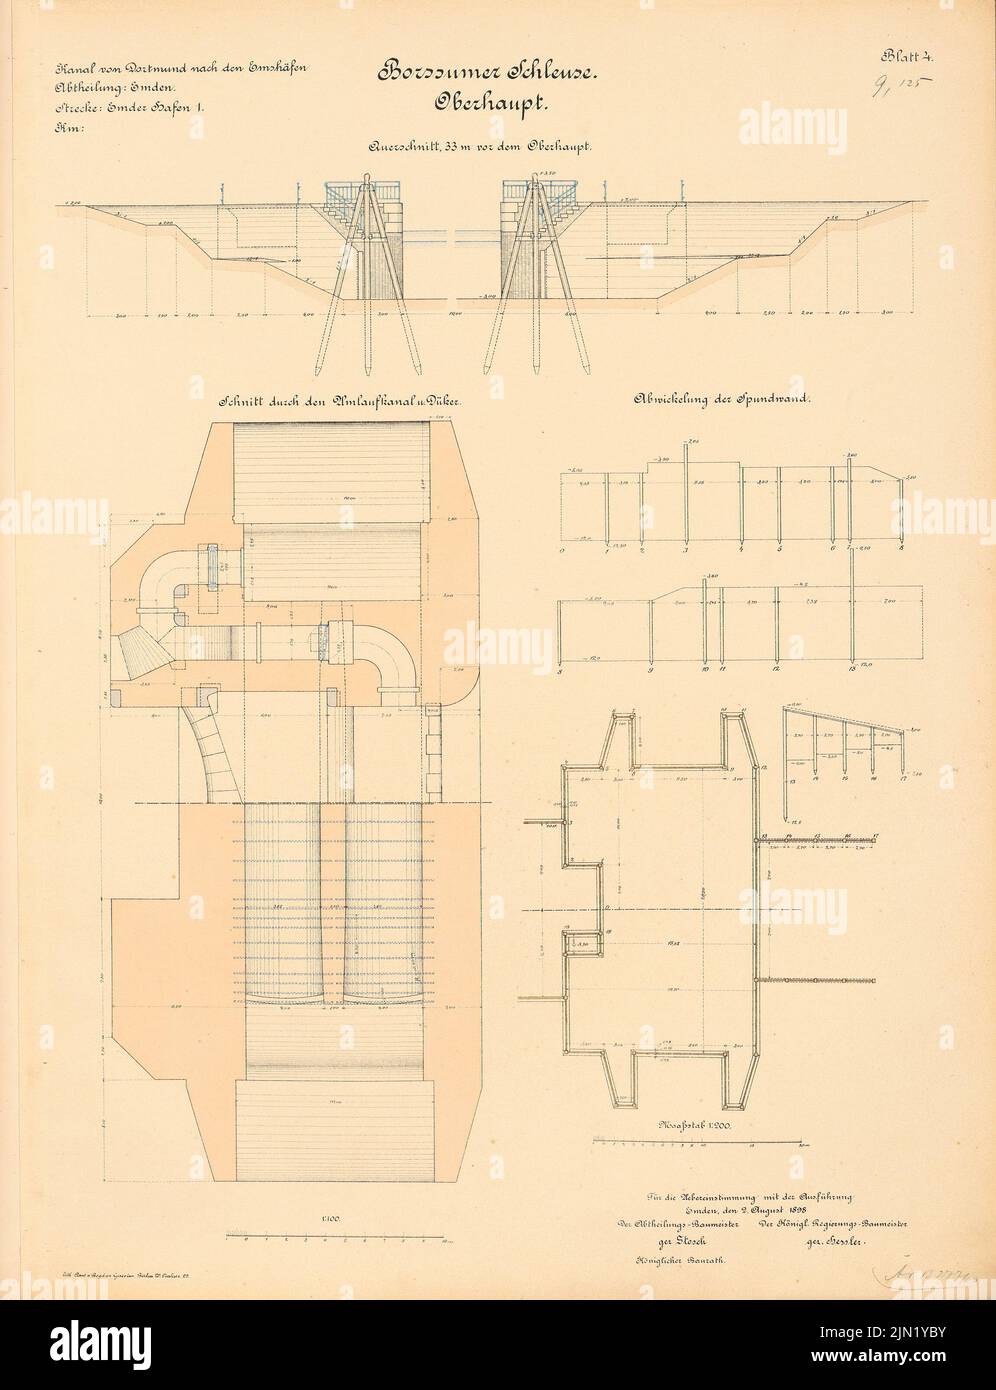 N.N., Dortmund-Ems-Canal. Schleuse, Borssum: Head: Processing of the sheet pile wall 1: 200, cuts 1: 100. Lithograph colored on paper, 66.1 x 50.7 cm (including scan edges) N.N. : Dortmund-Ems-Kanal. Schleuse, Borssum Stock Photo